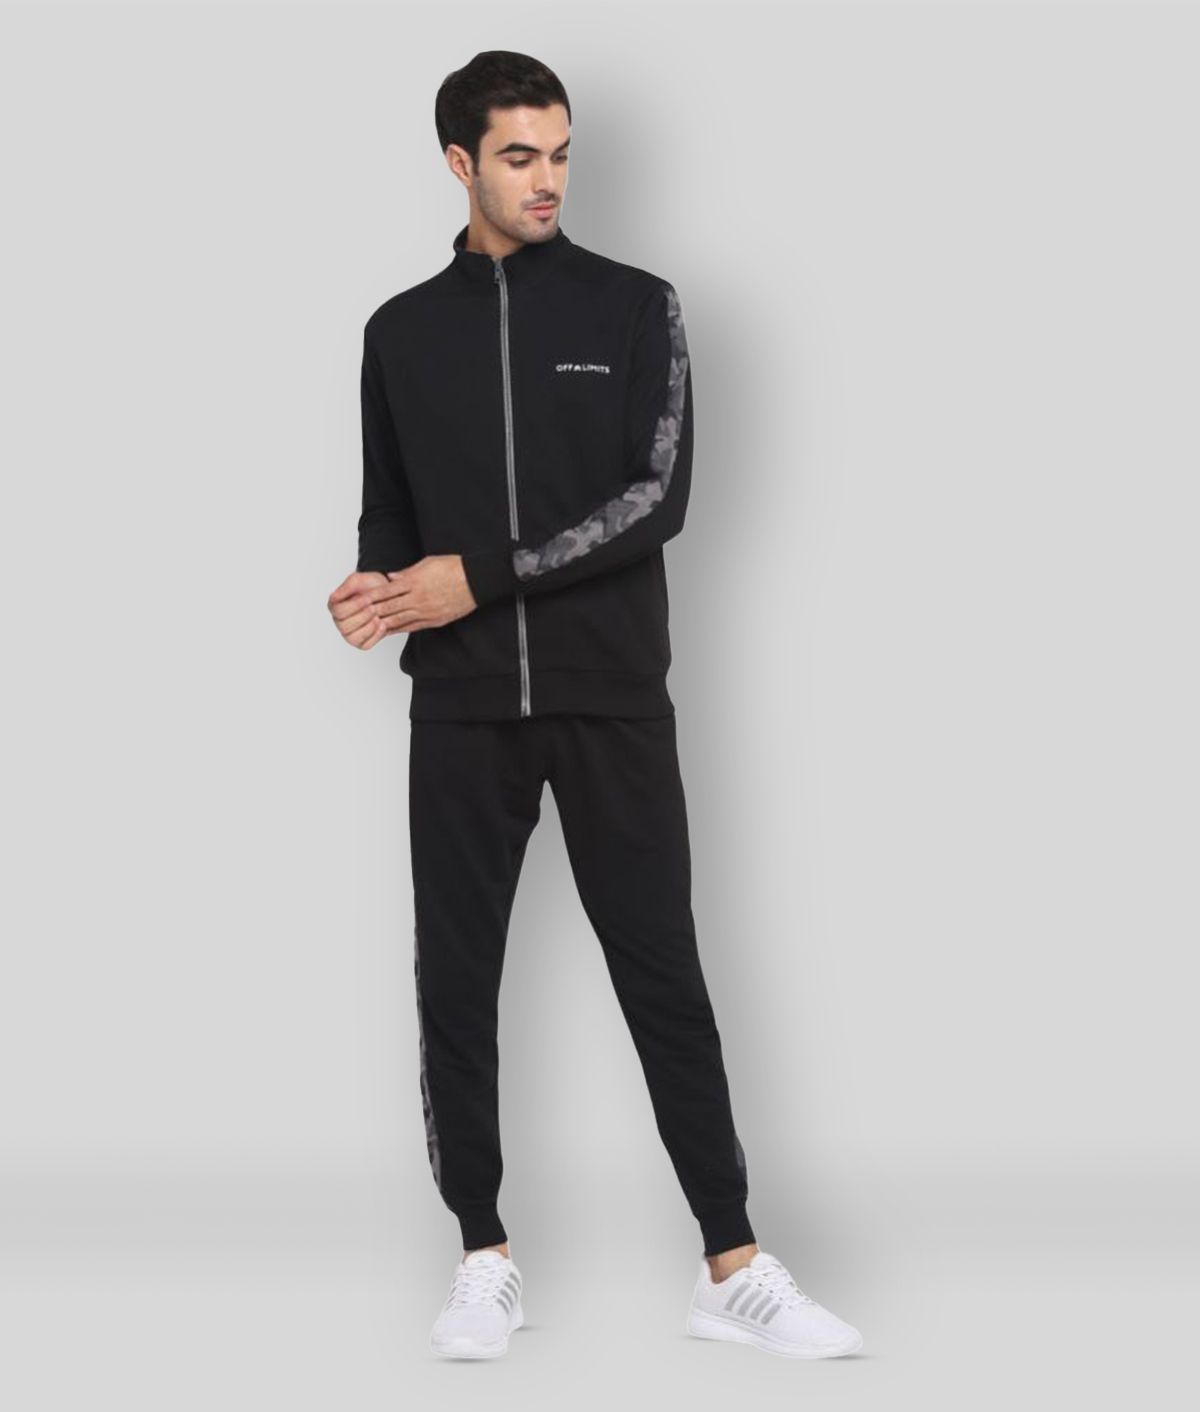 OFF LIMITS - Black Polyester Regular Fit Solid Men's Sports Tracksuit ( Pack of 1 )